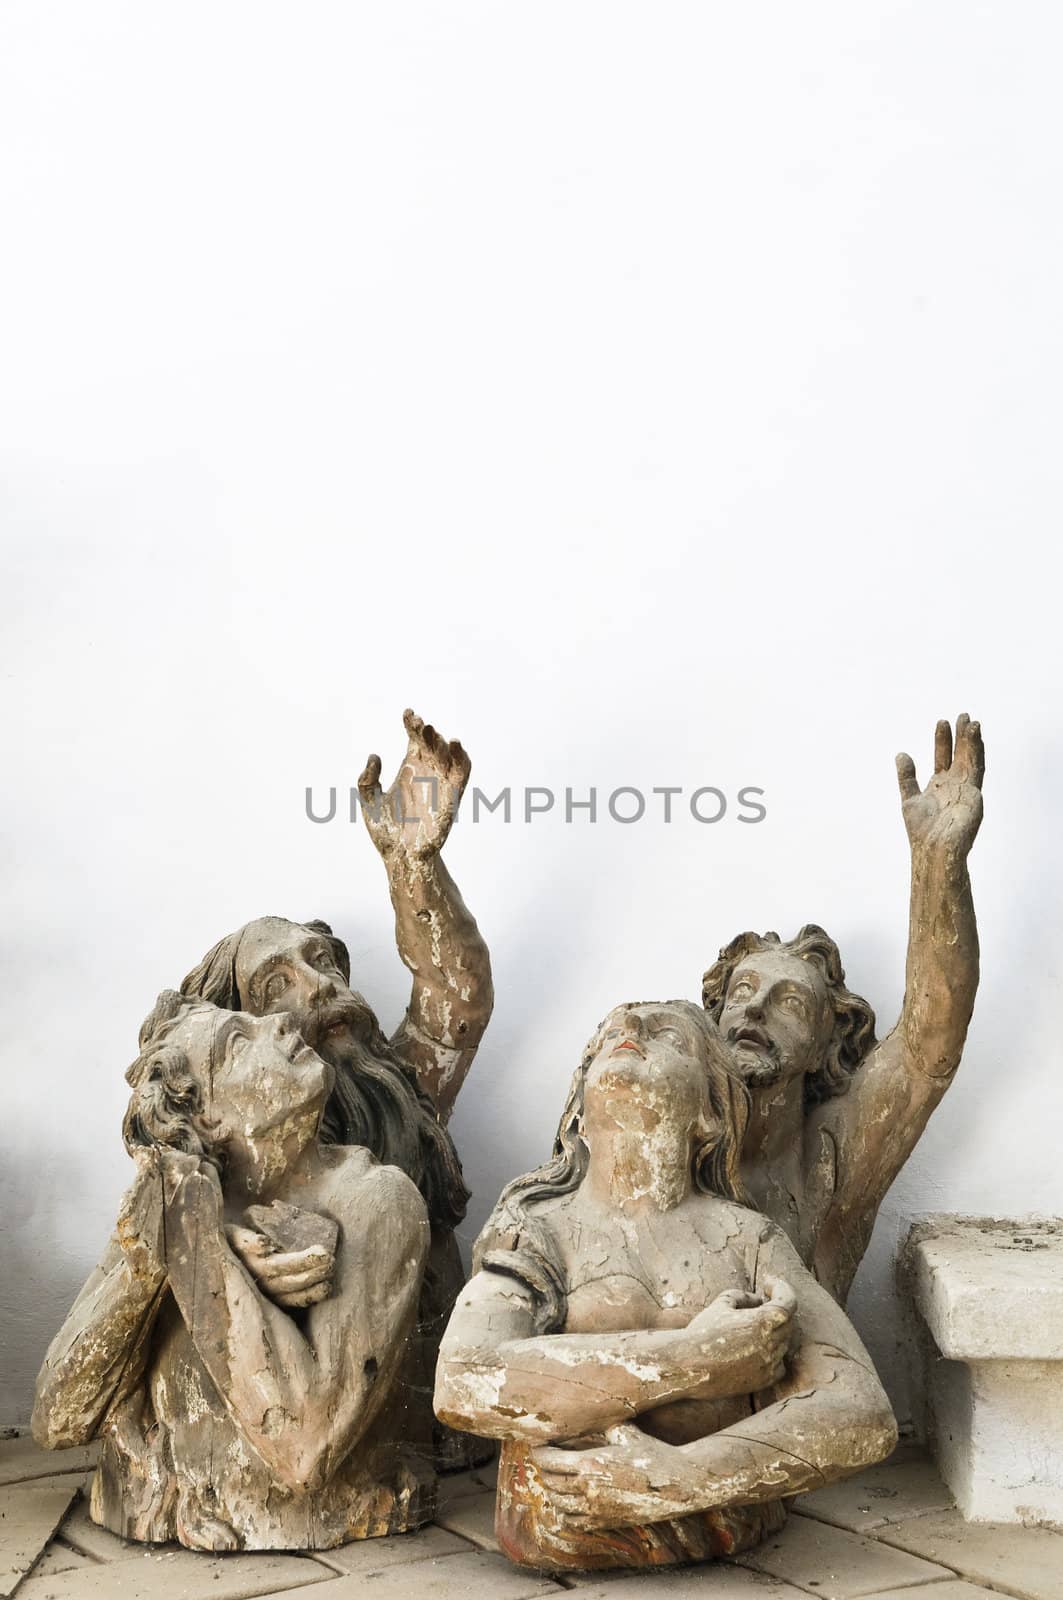 Abandoned wood sculptures of saints pointing above
